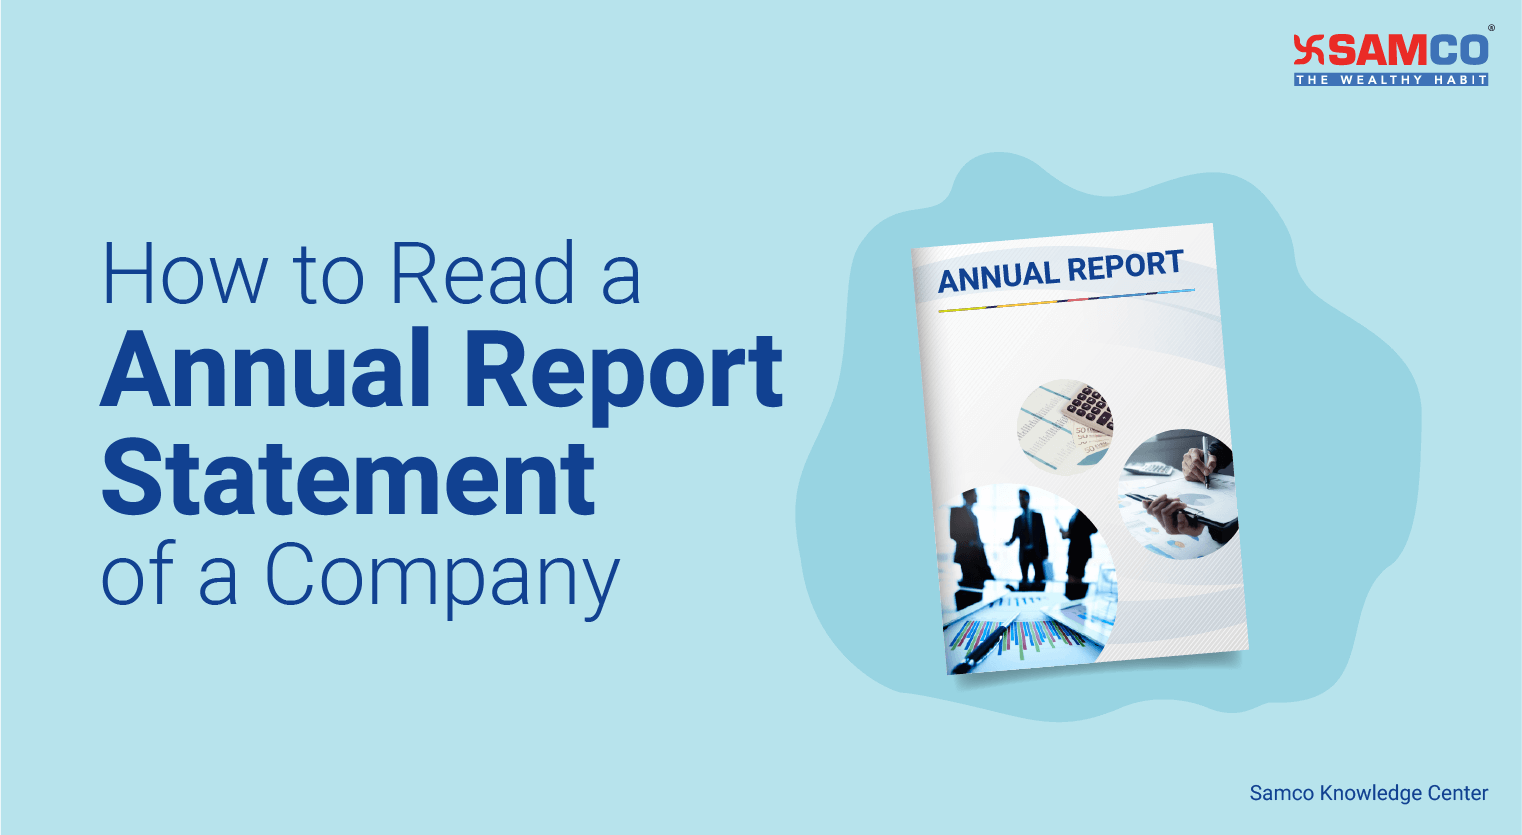 How to Read an Annual Report of a Company